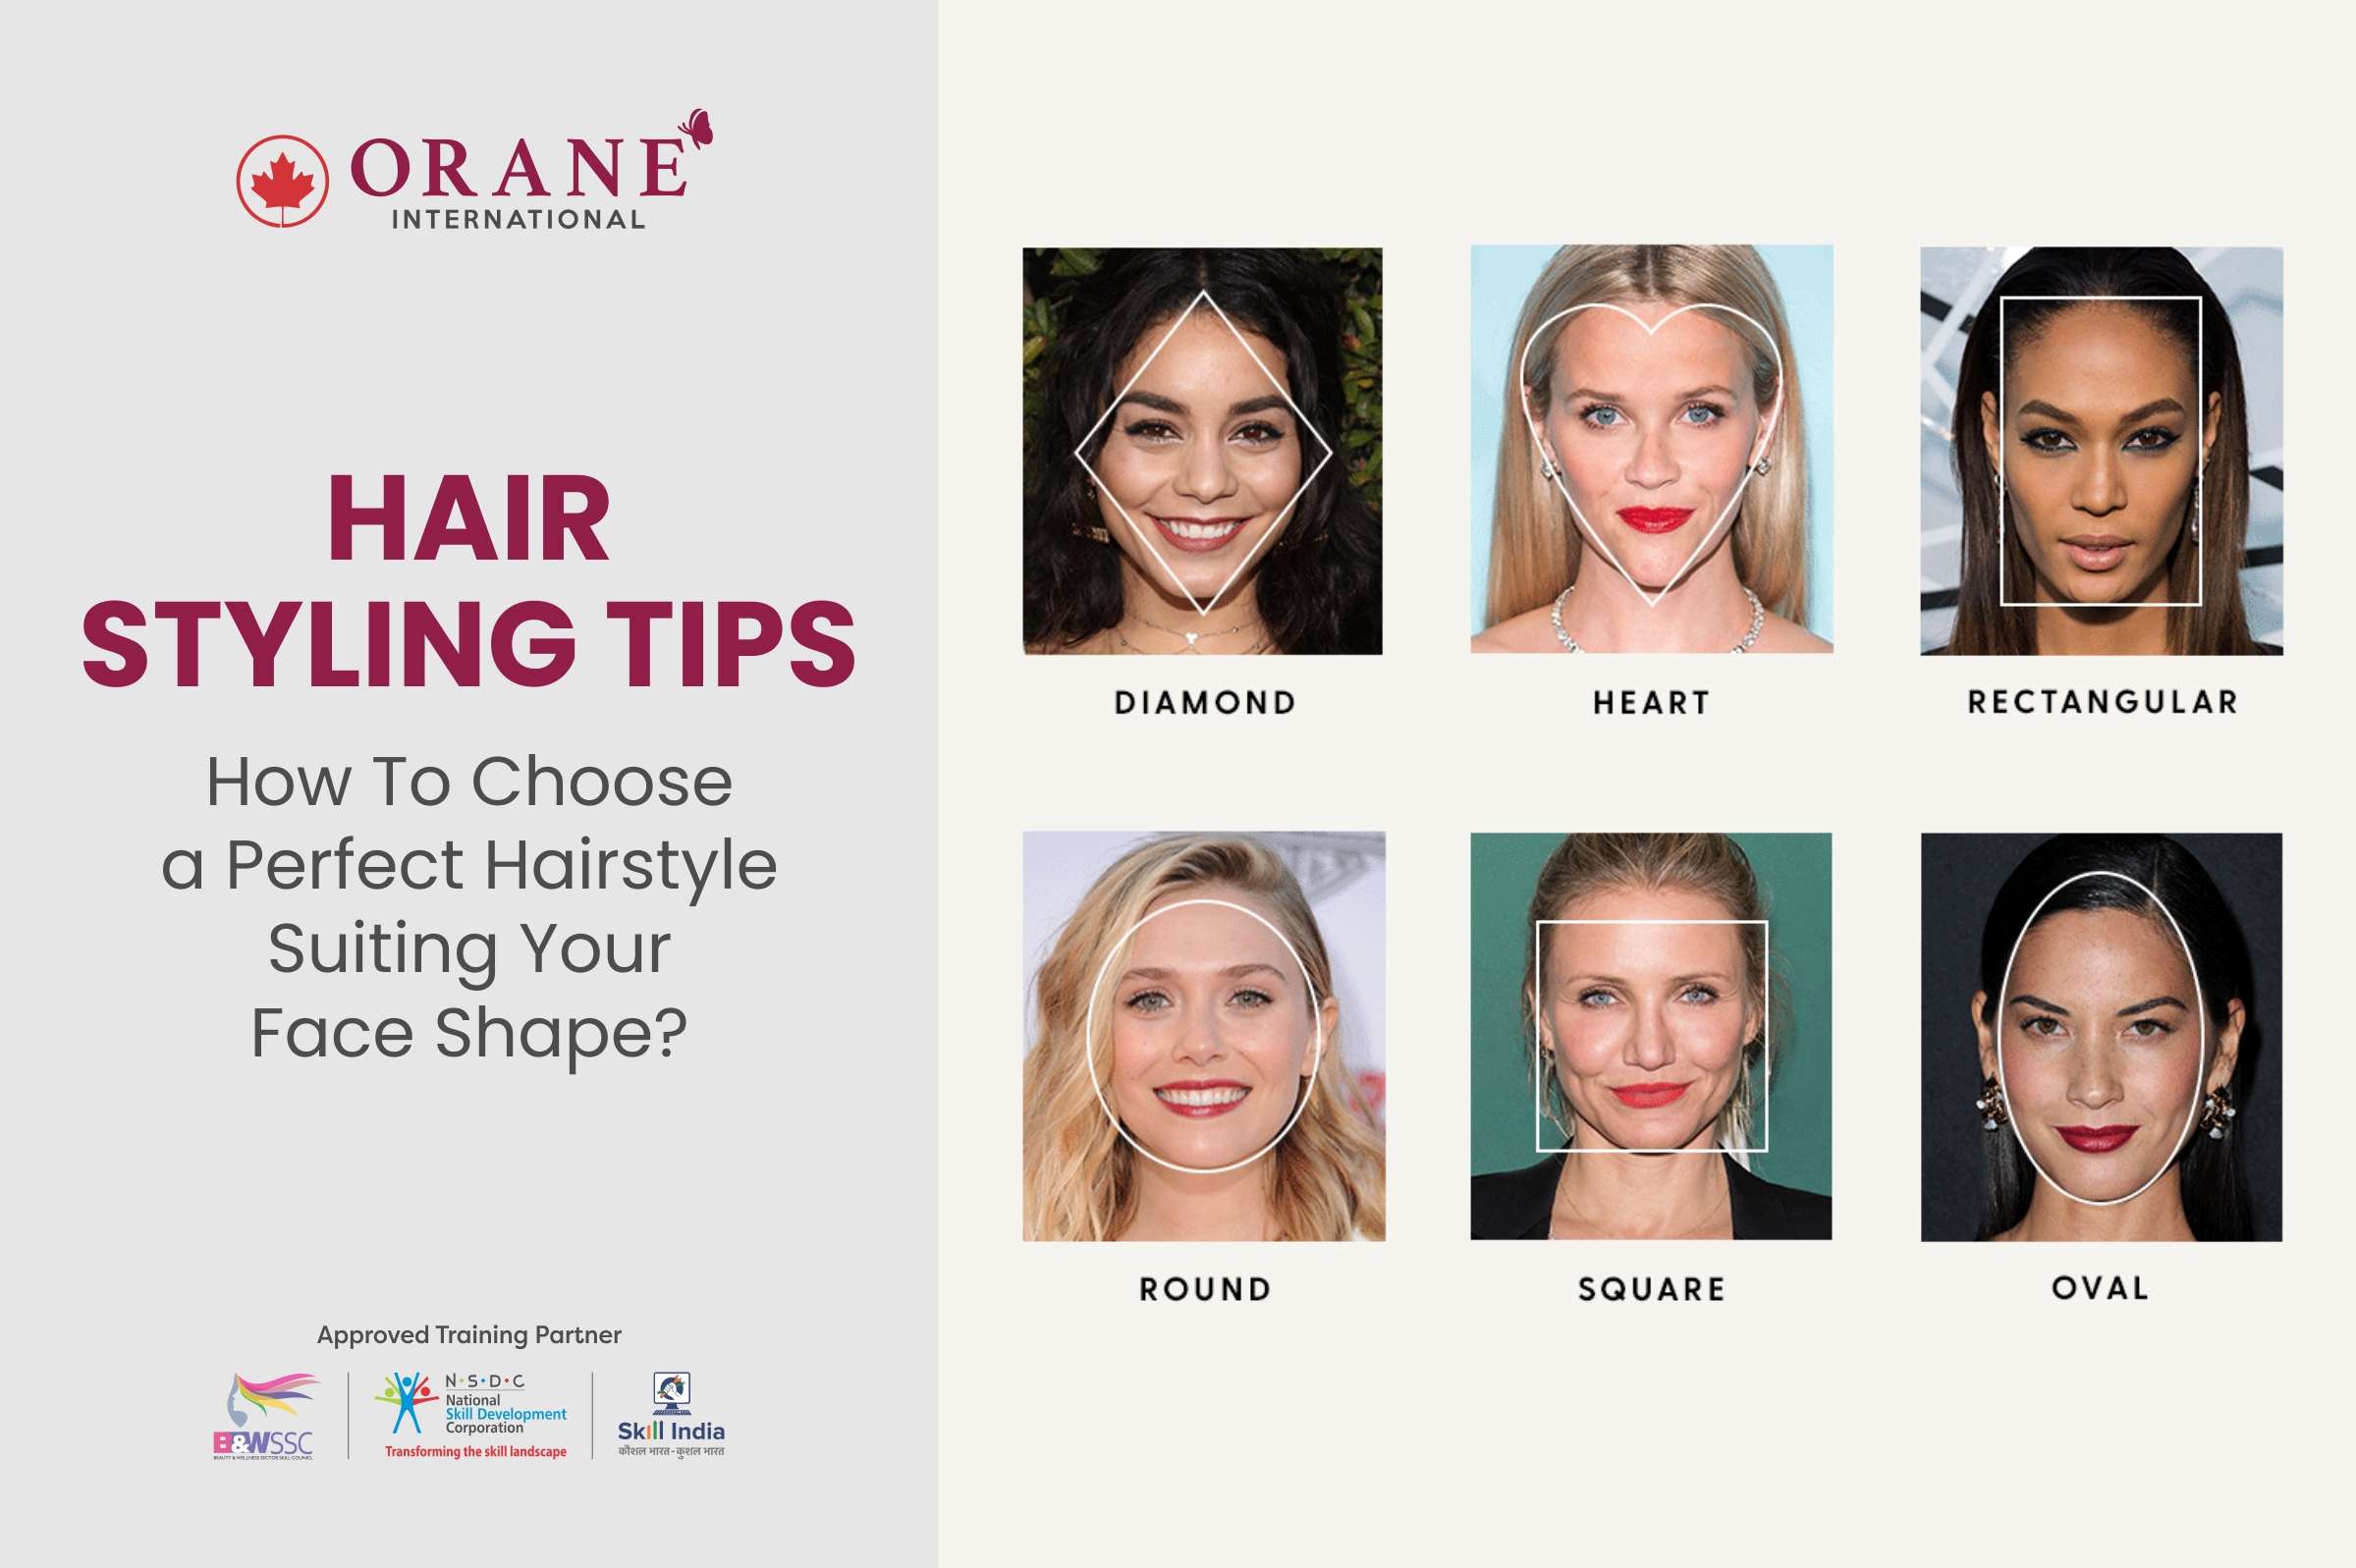 How To Choose a Perfect Hairstyle Suiting Your Face Shape? - Orane Beauty  Institute